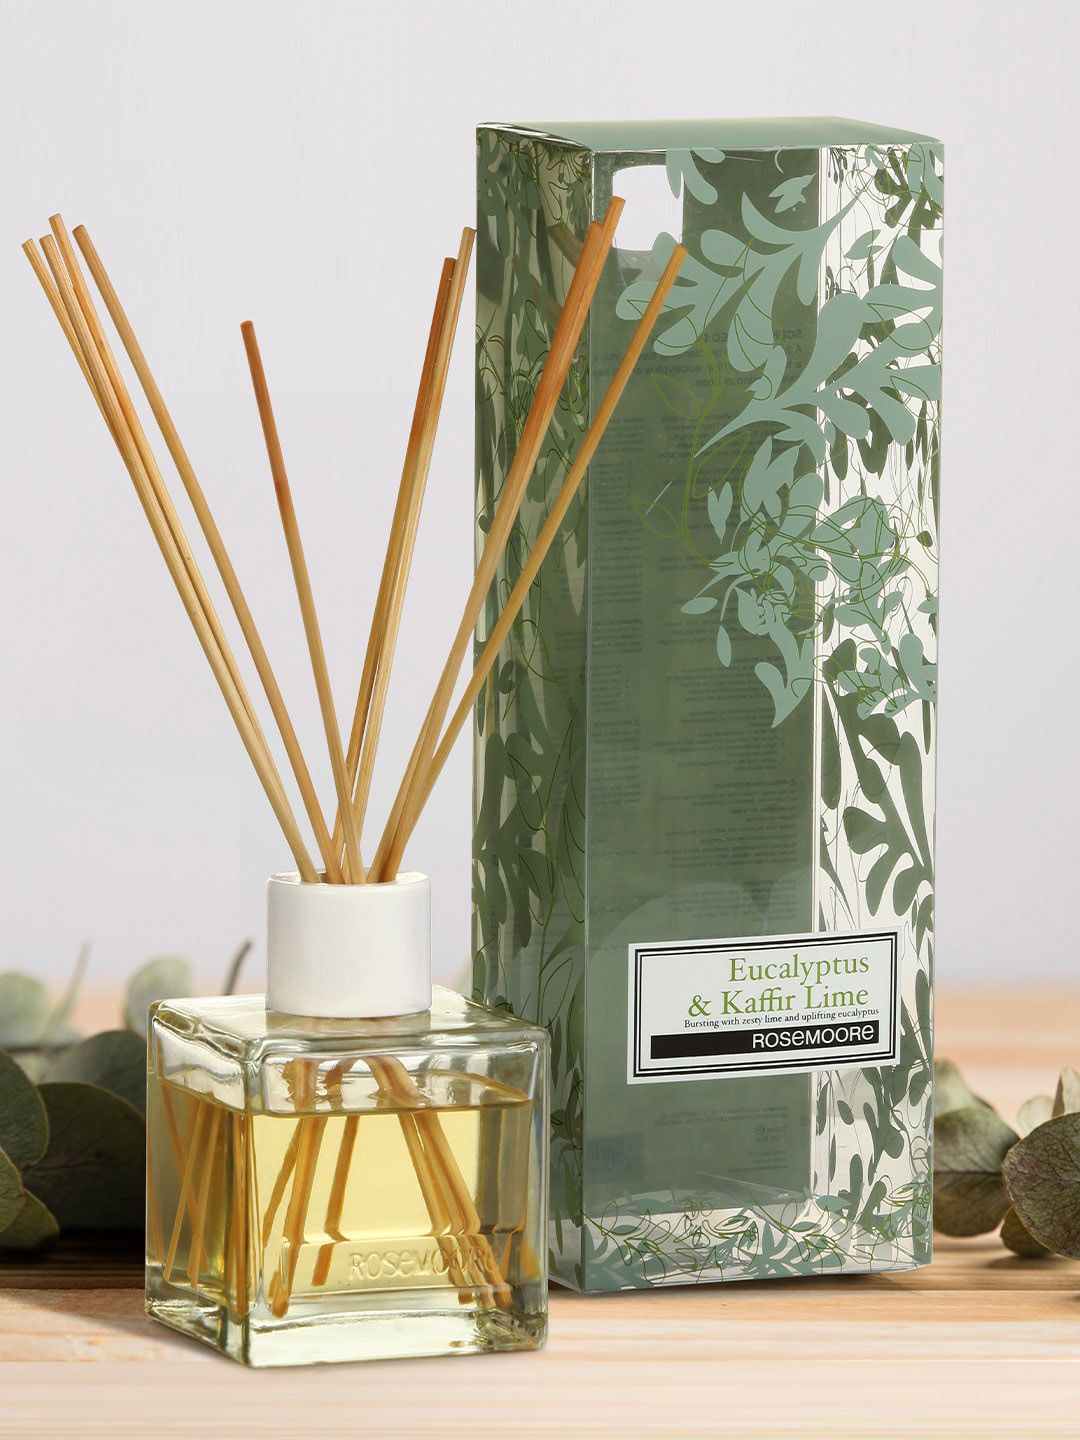 ROSEMOORe Eucalyptus & Kaffir Lime Scented Reed Diffuser Price in India